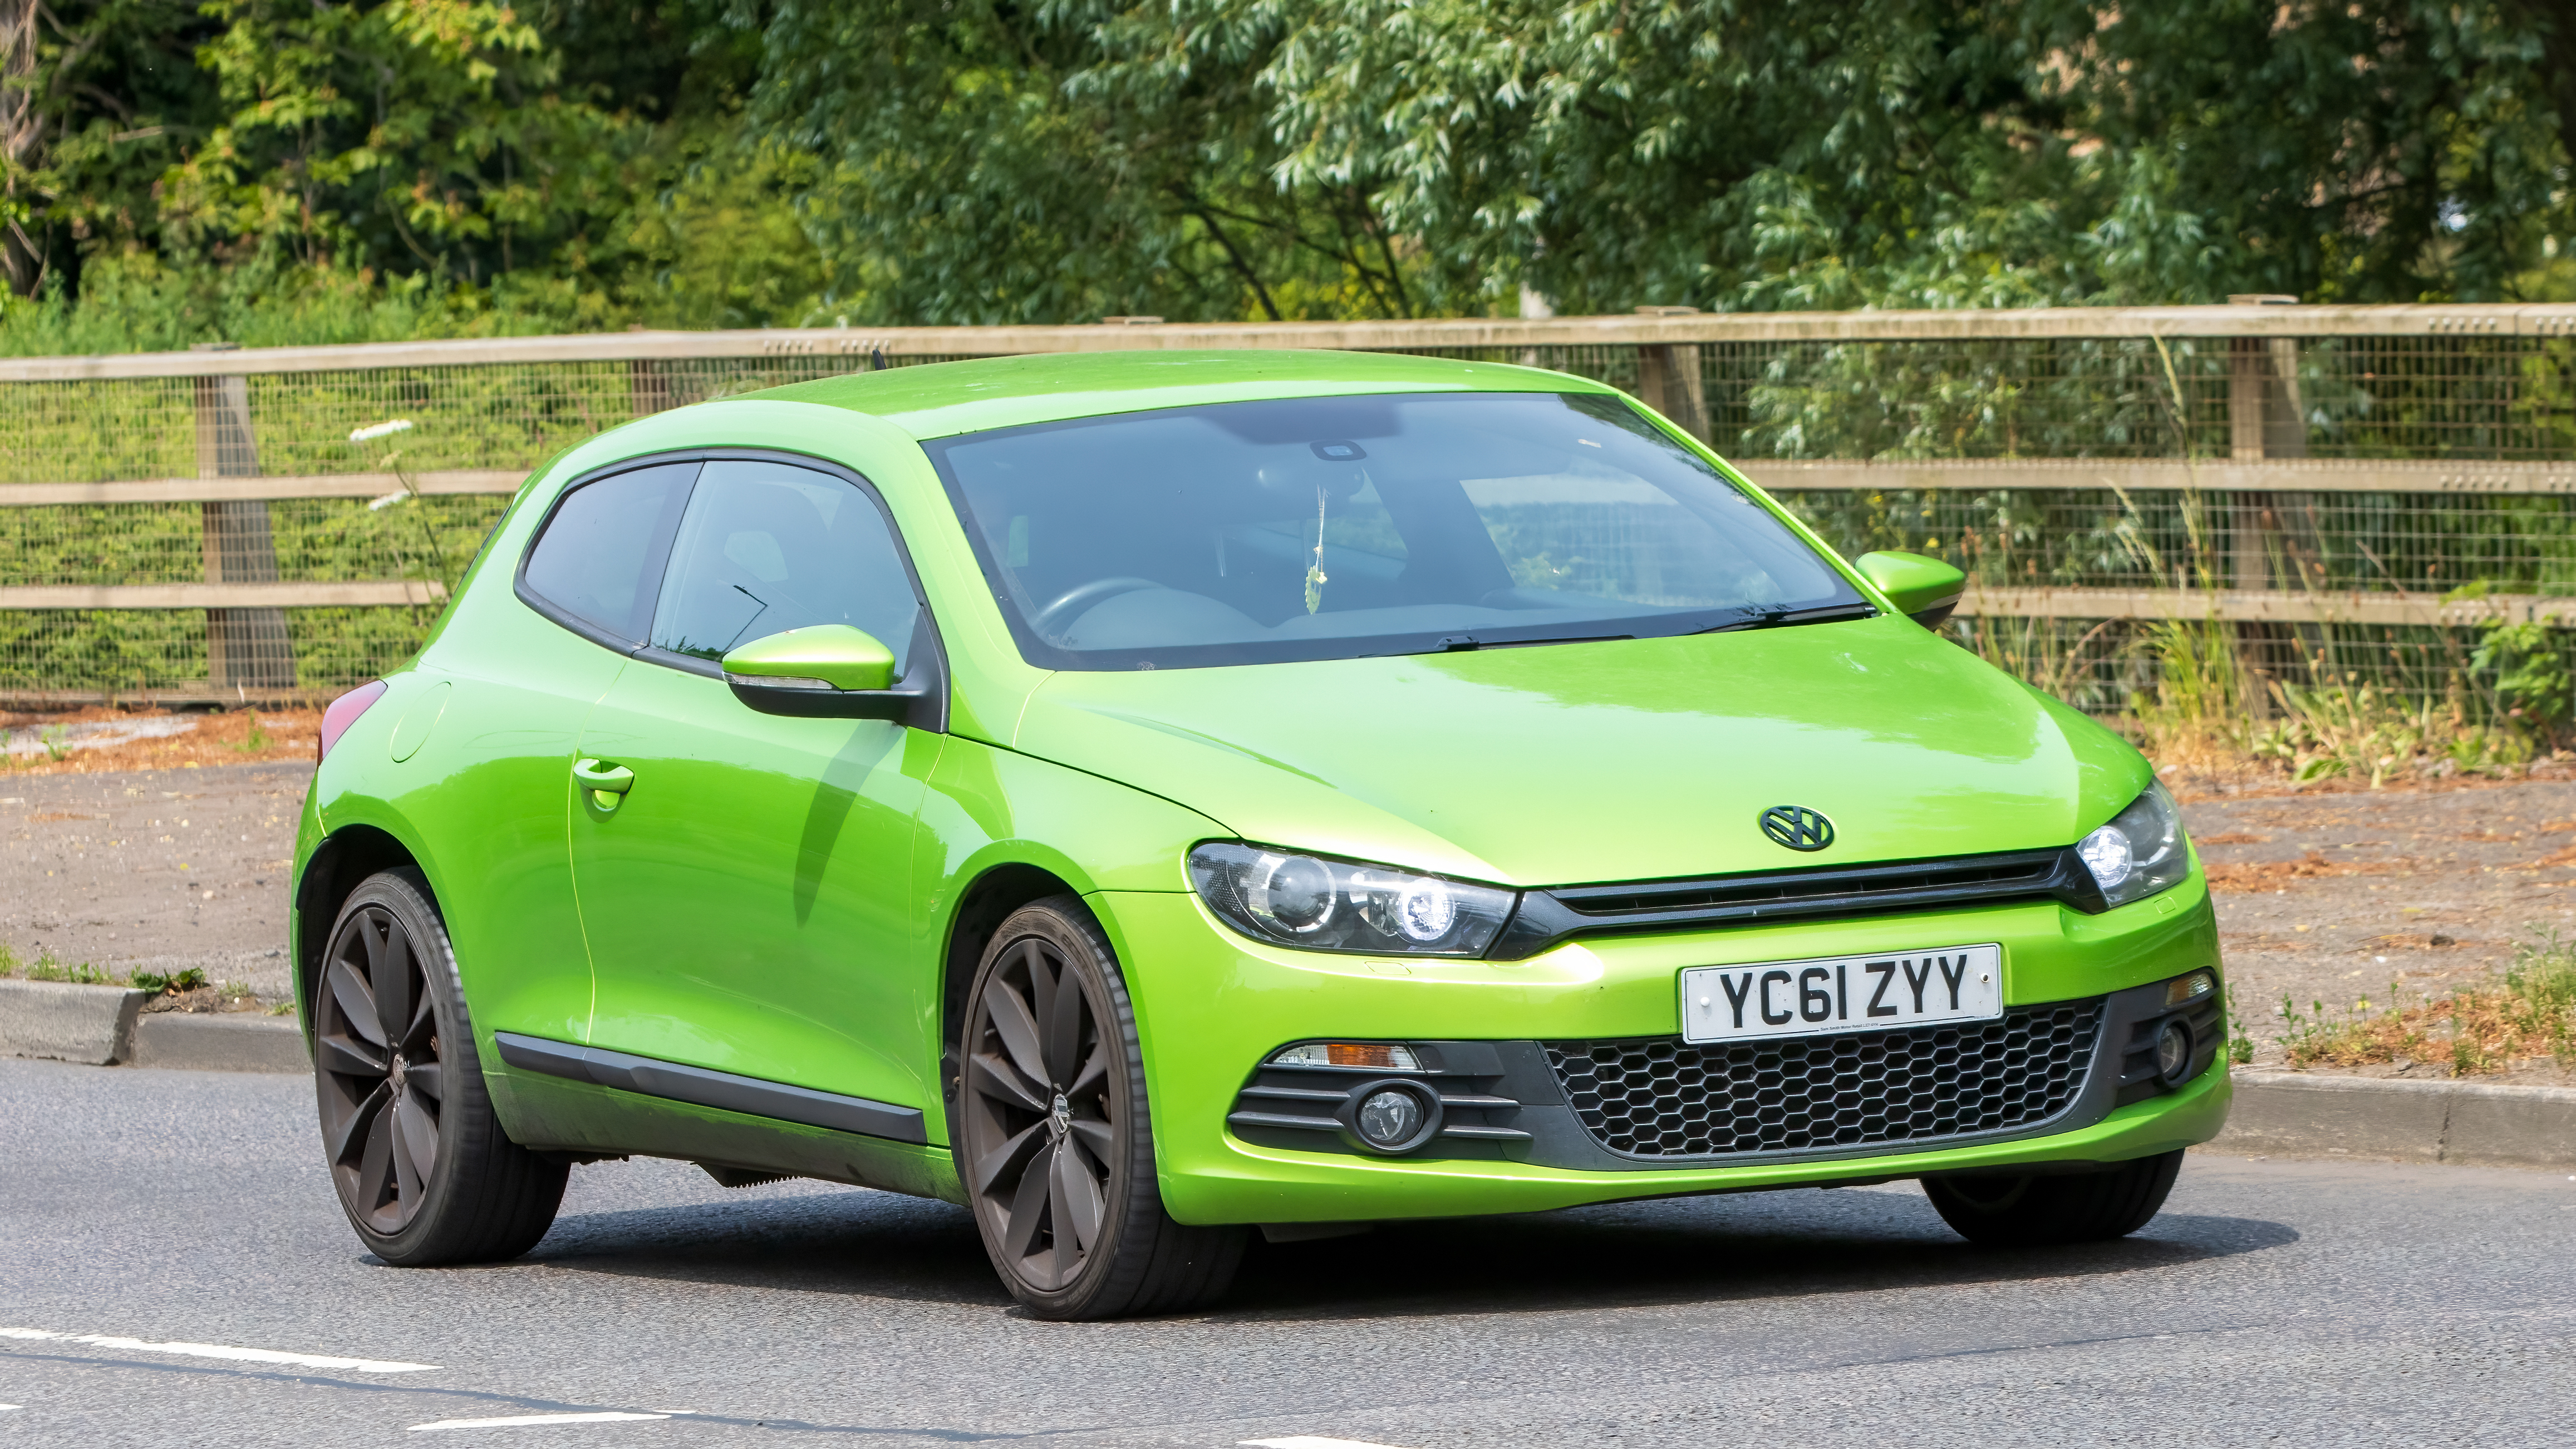 The Volkswagen Scirocco is one of Mo's pick for a budget friendly hatchback